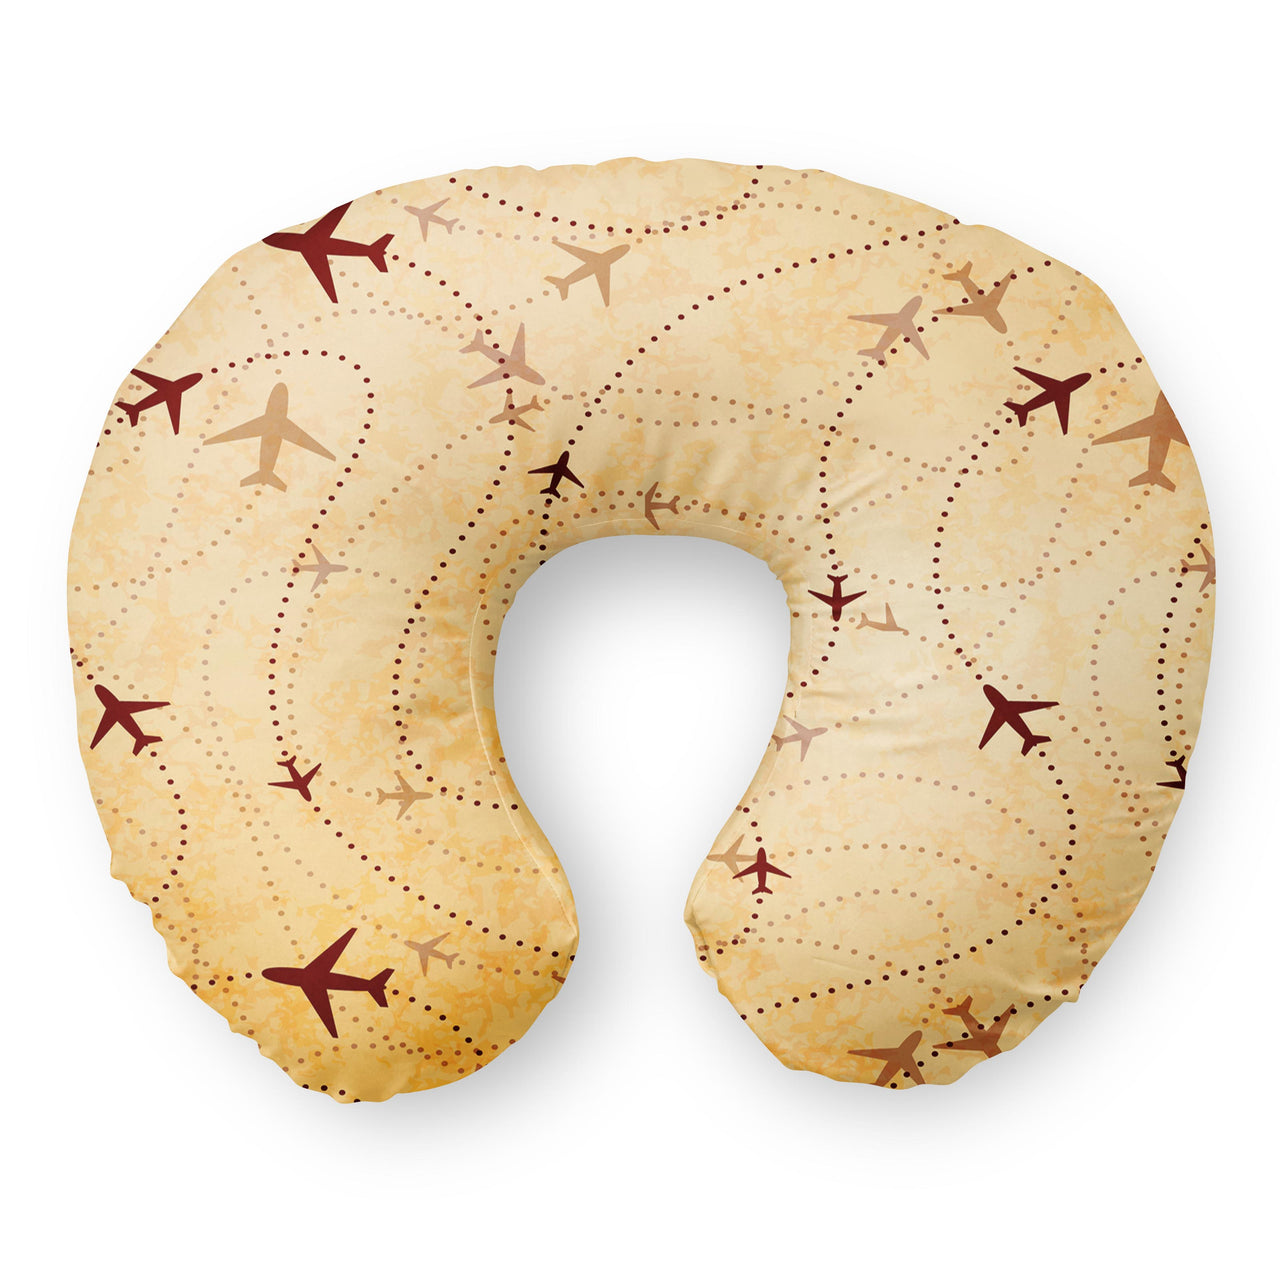 Vintage Travelling with Aircraft Travel & Boppy Pillows